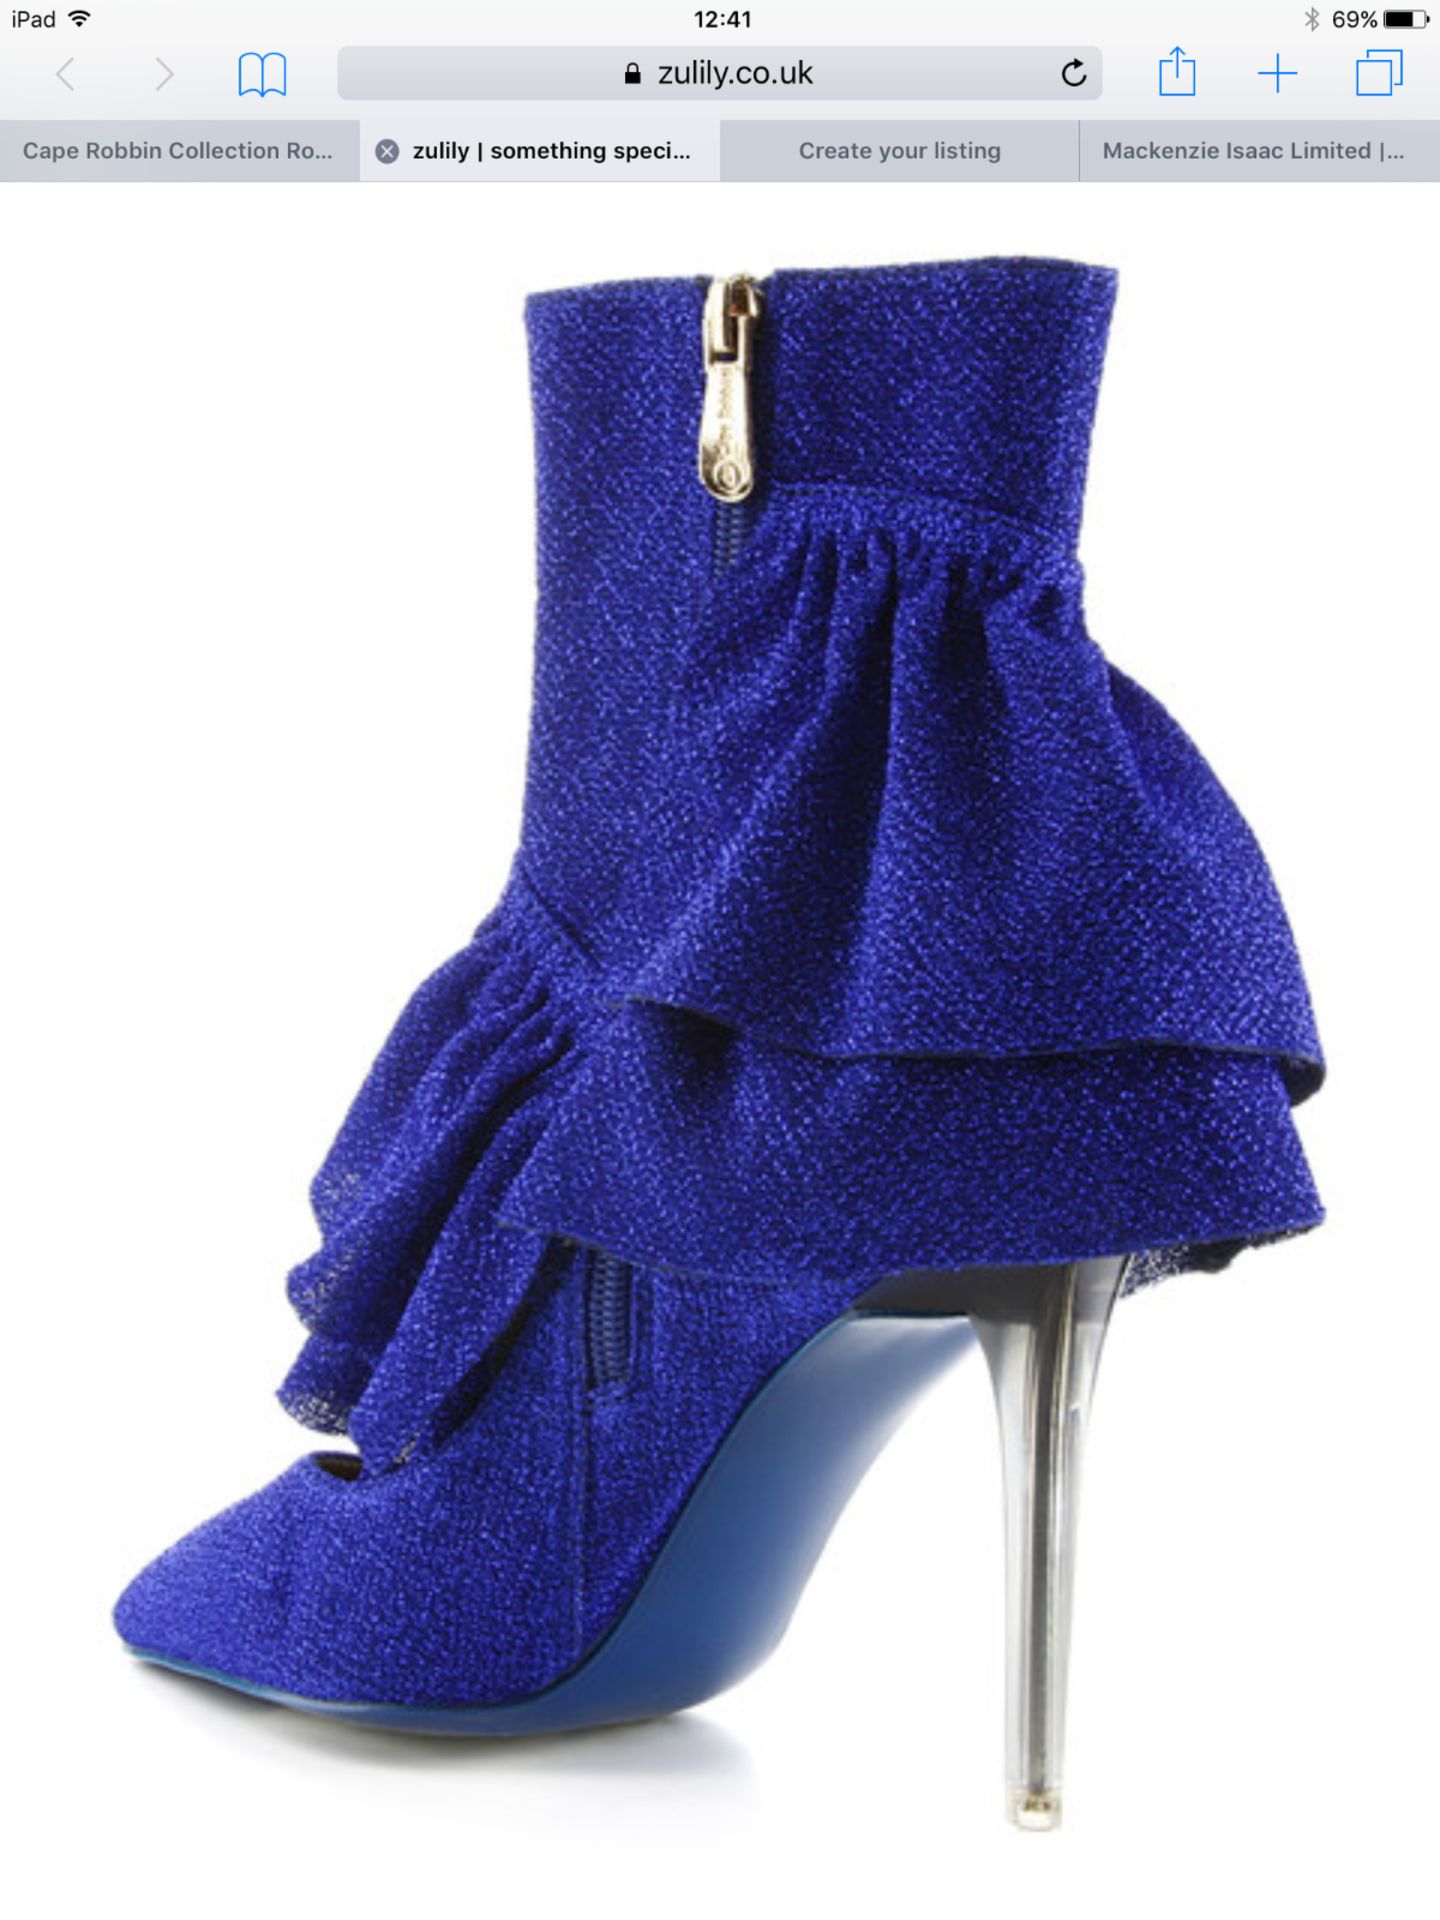 Cape Robbin Collection Royal Blue Beatrix Ruffle Boot, Size Eur 39, Rrp £59.99 (New With Box) [ - Image 4 of 7